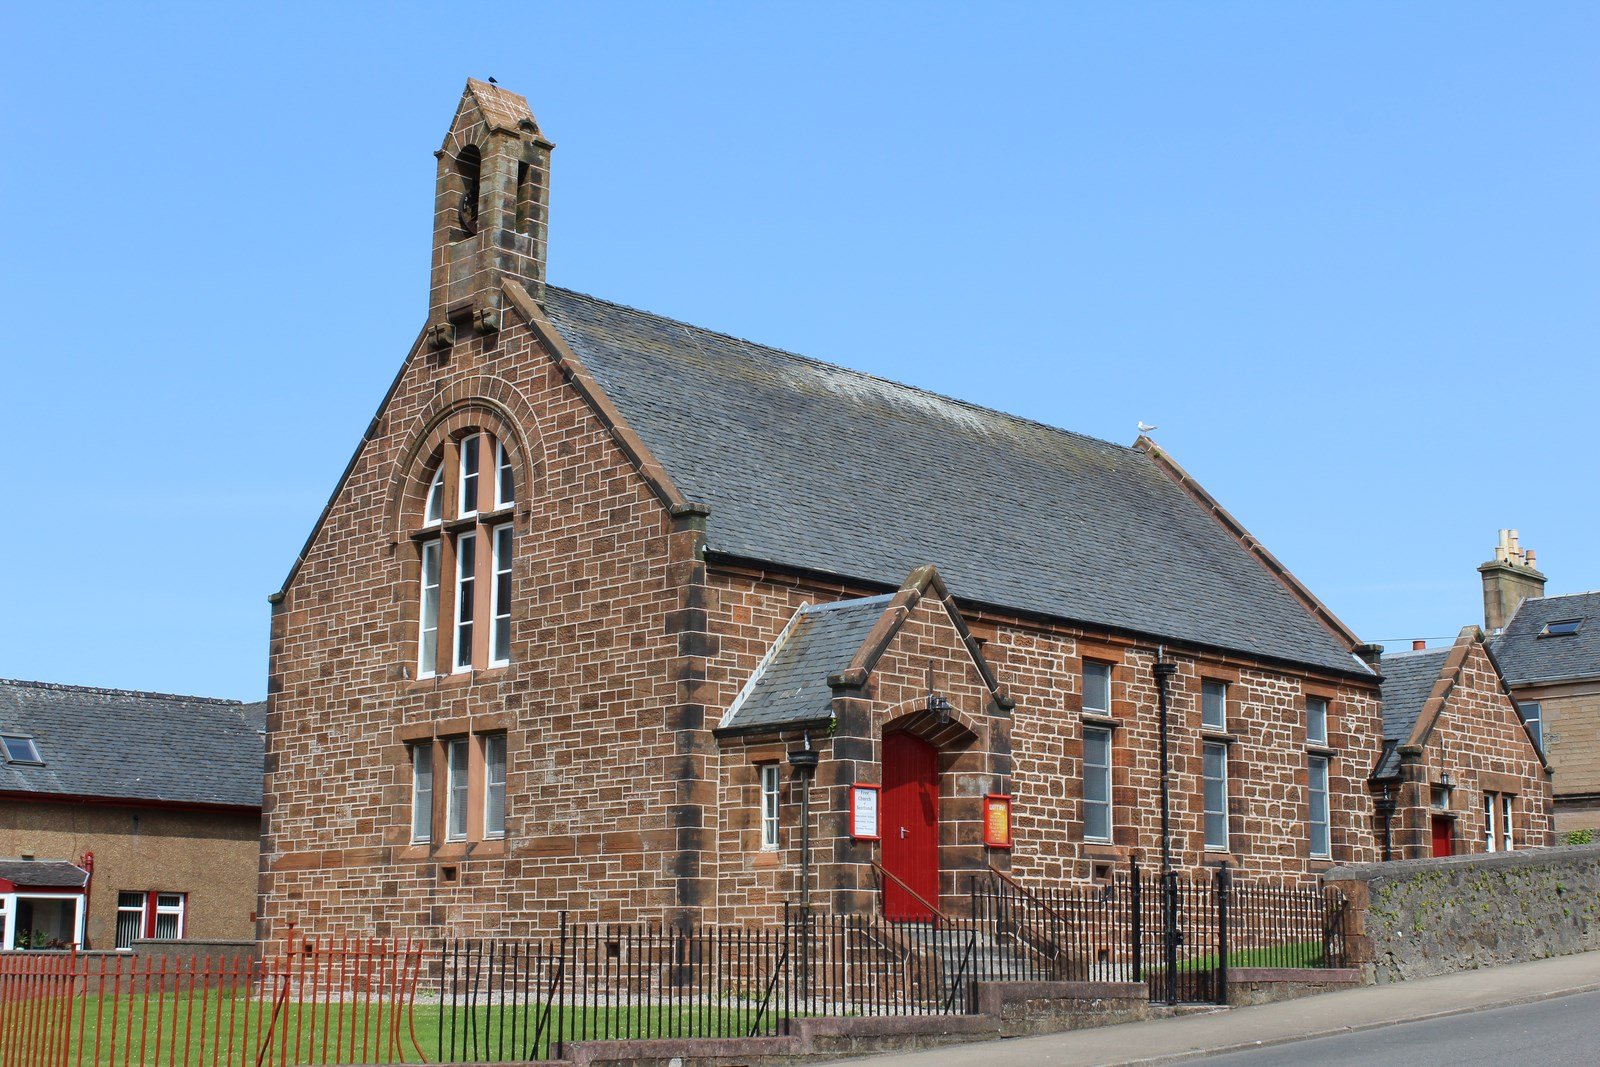 A picture of a small brick church with a red door against a blue sky